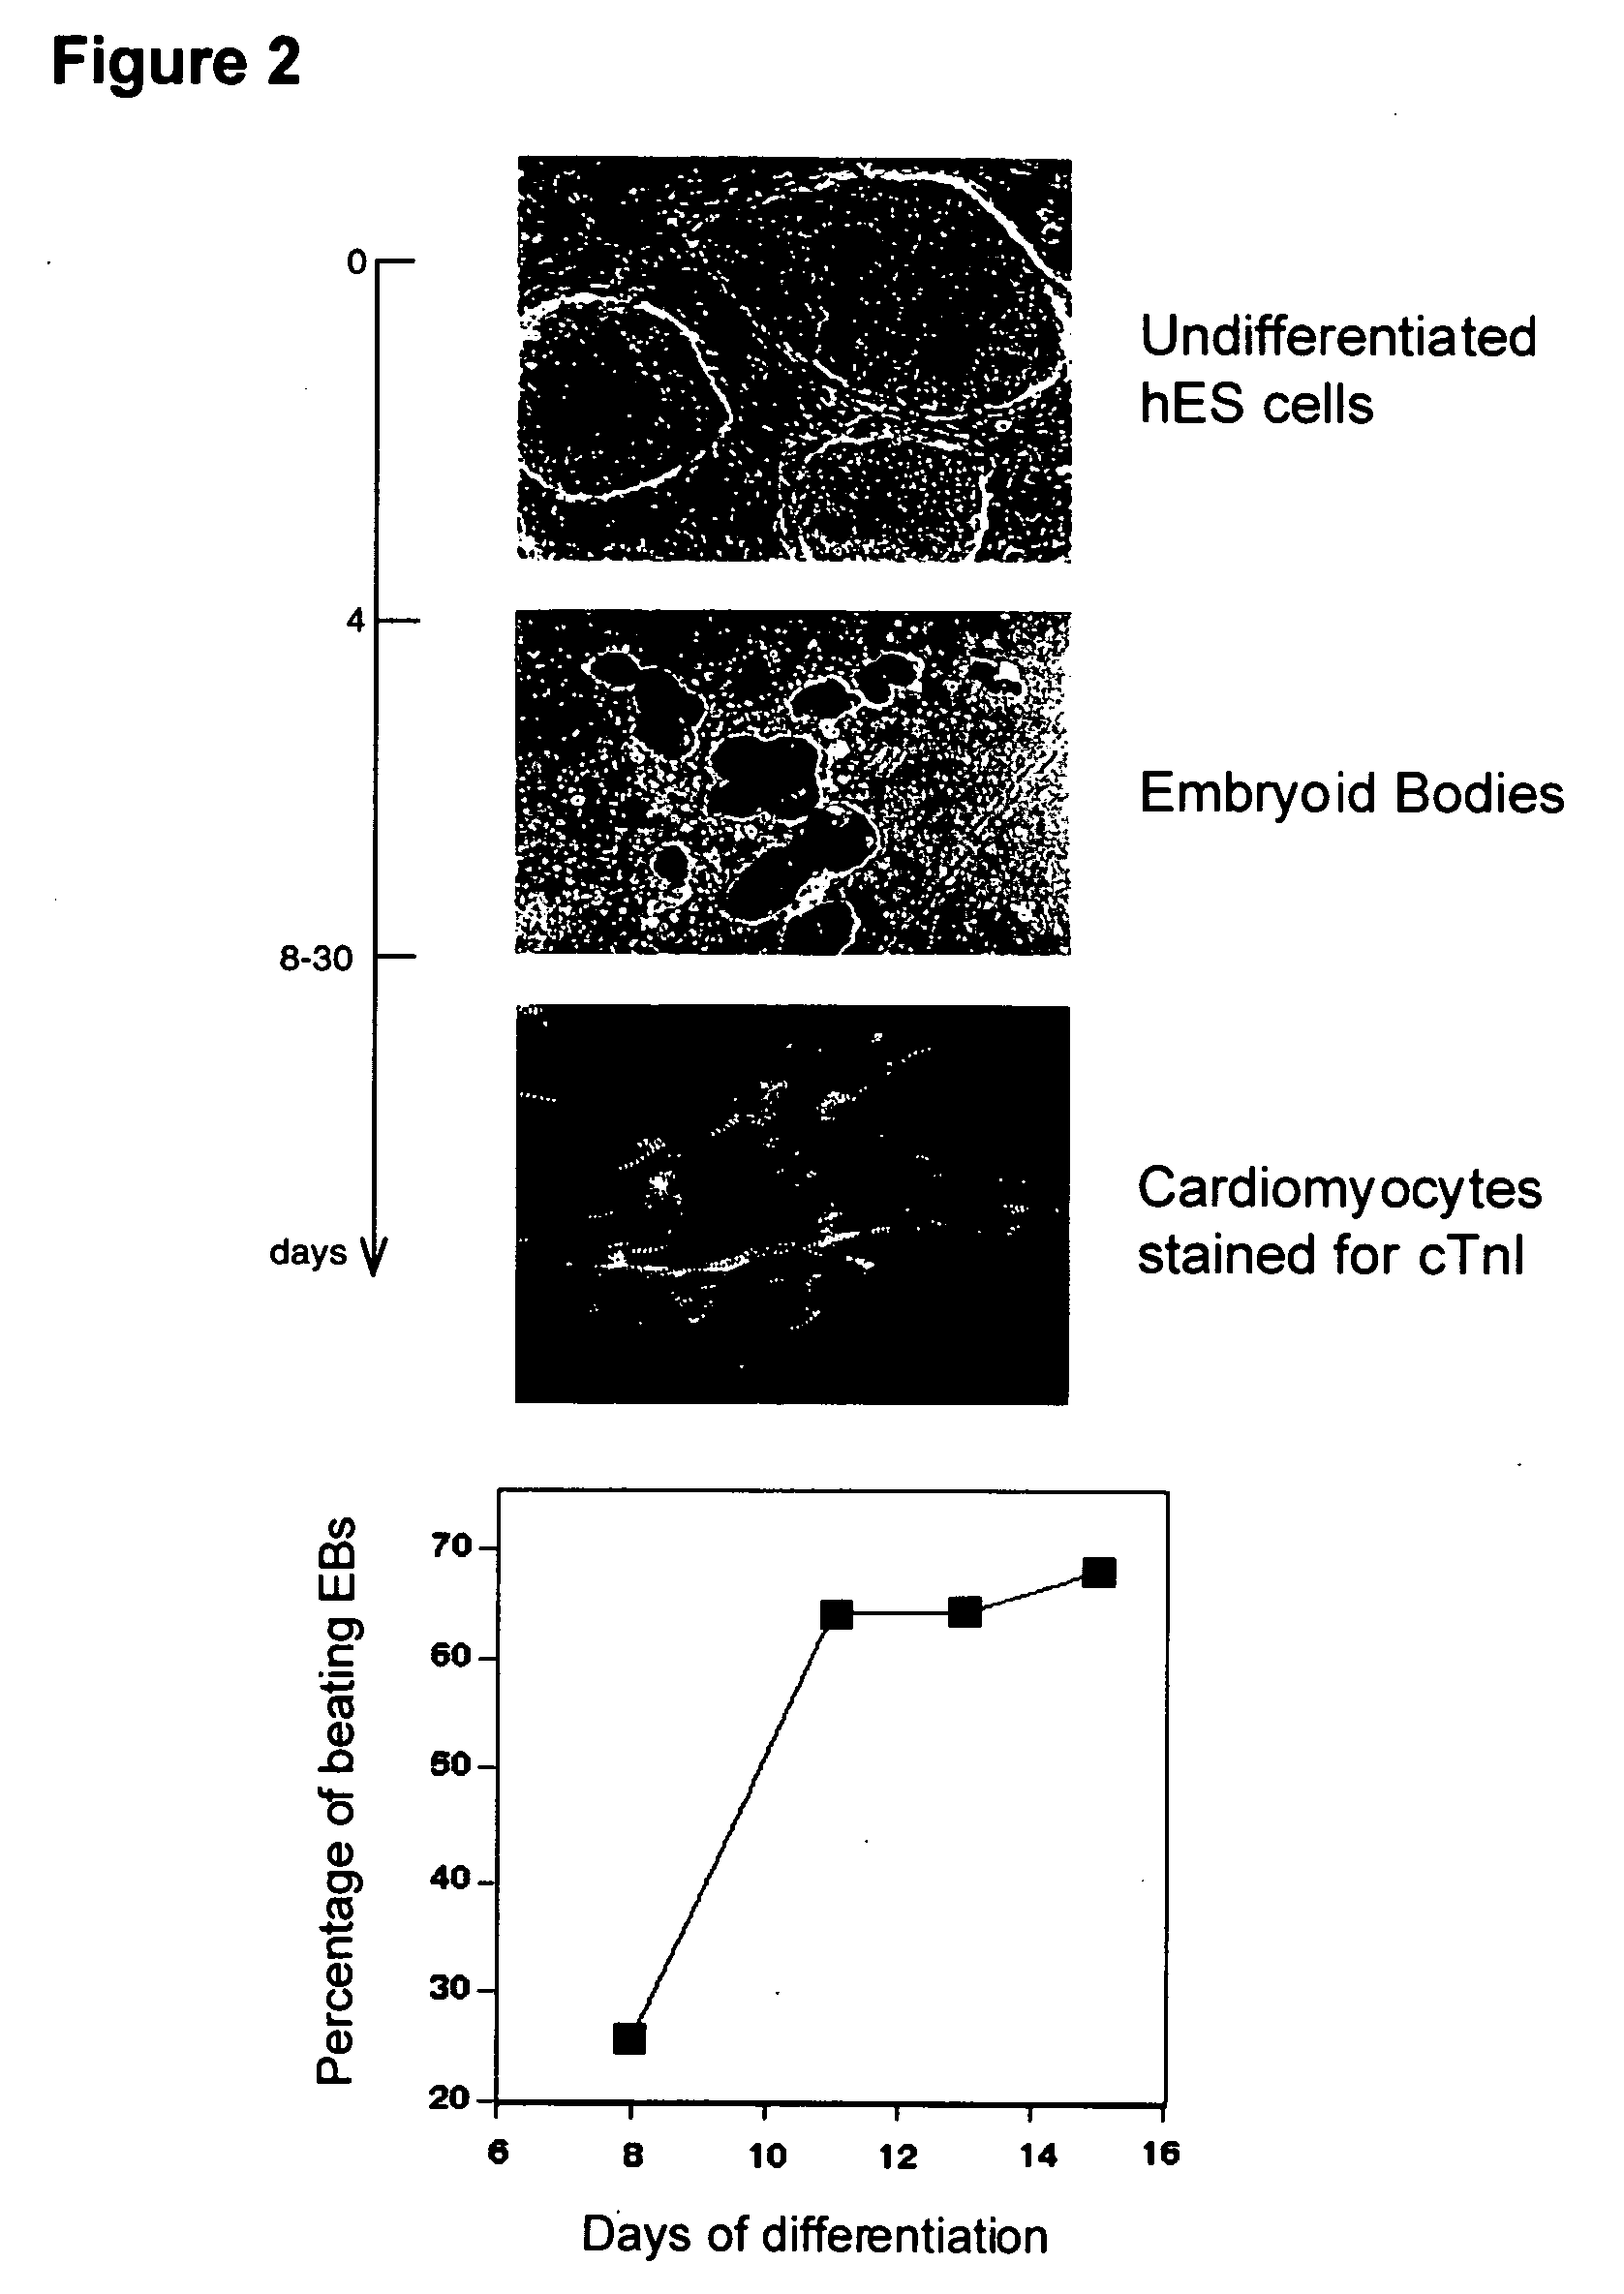 Process for making transplantable cardiomyocytes from human embryonic stem cells